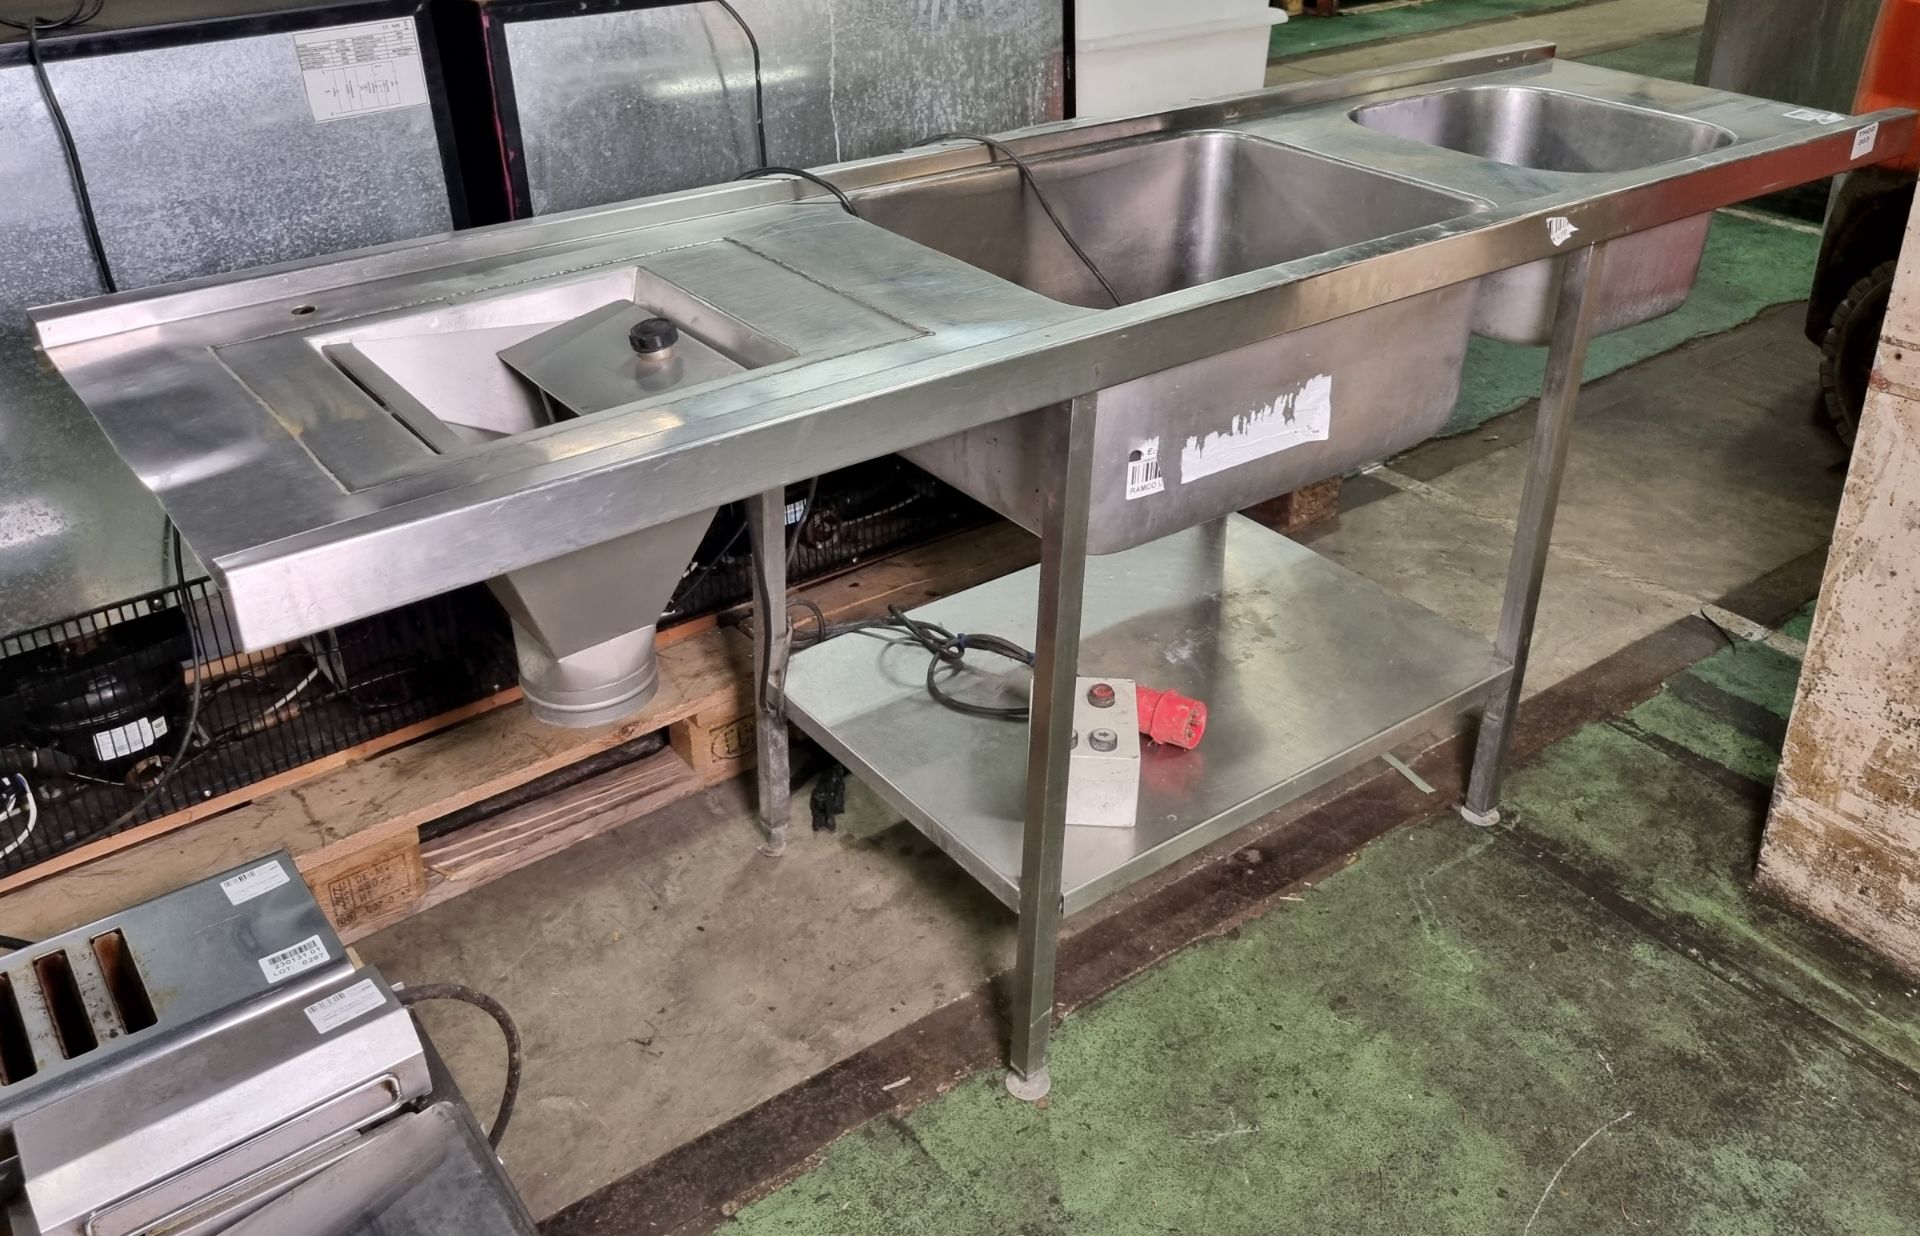 Stainless steel double sink unit with waste disposal shoot (5 pin connector for motor)